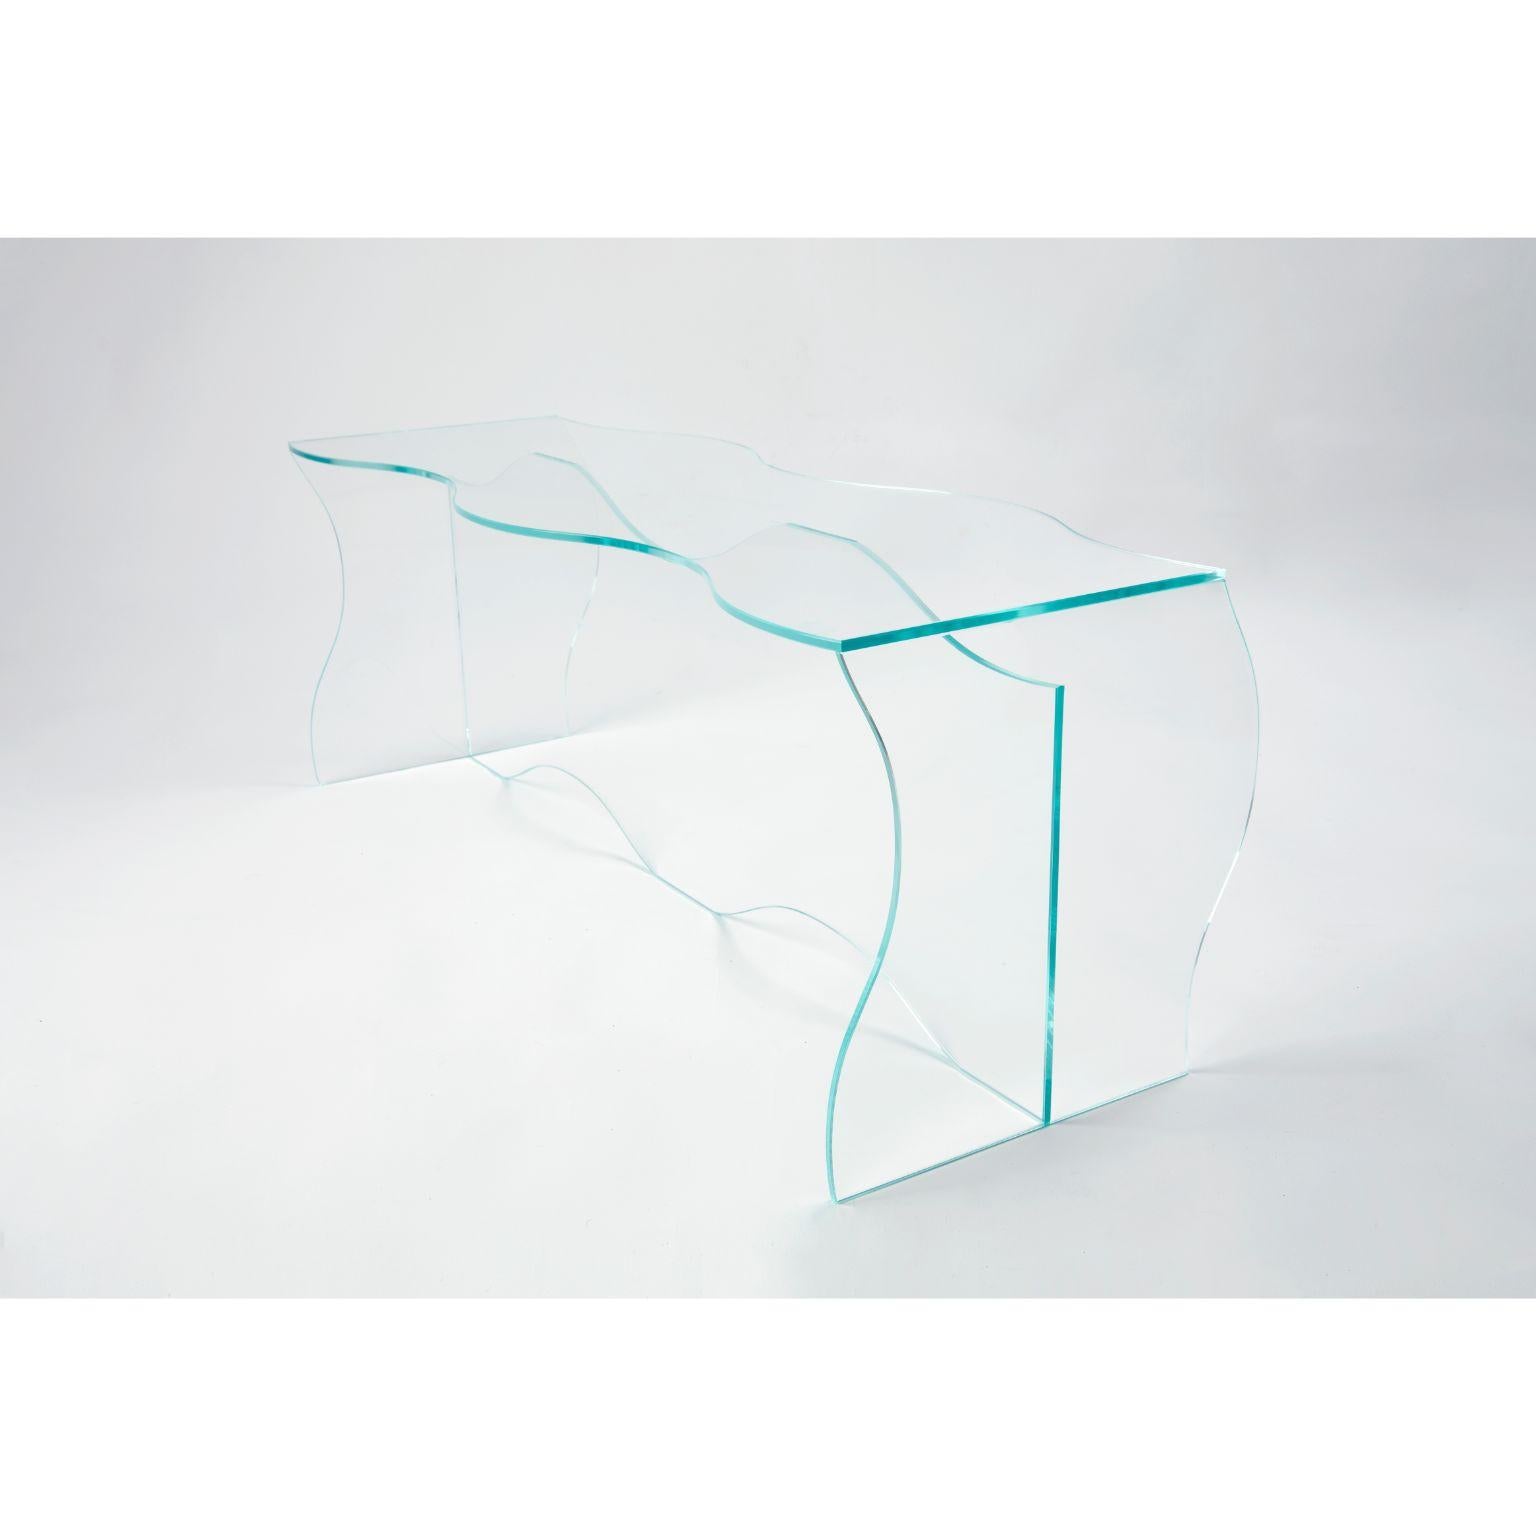 Wave clear glass coffee table sculpted by Studio-Chacha
Dimensions: 40 x 110 x 40 cm
Materials: Clear glass 

Studio-Chacha is a high-end art furniture studio founded in 2017 that creates a new aesthetic with an unfamiliar combination of